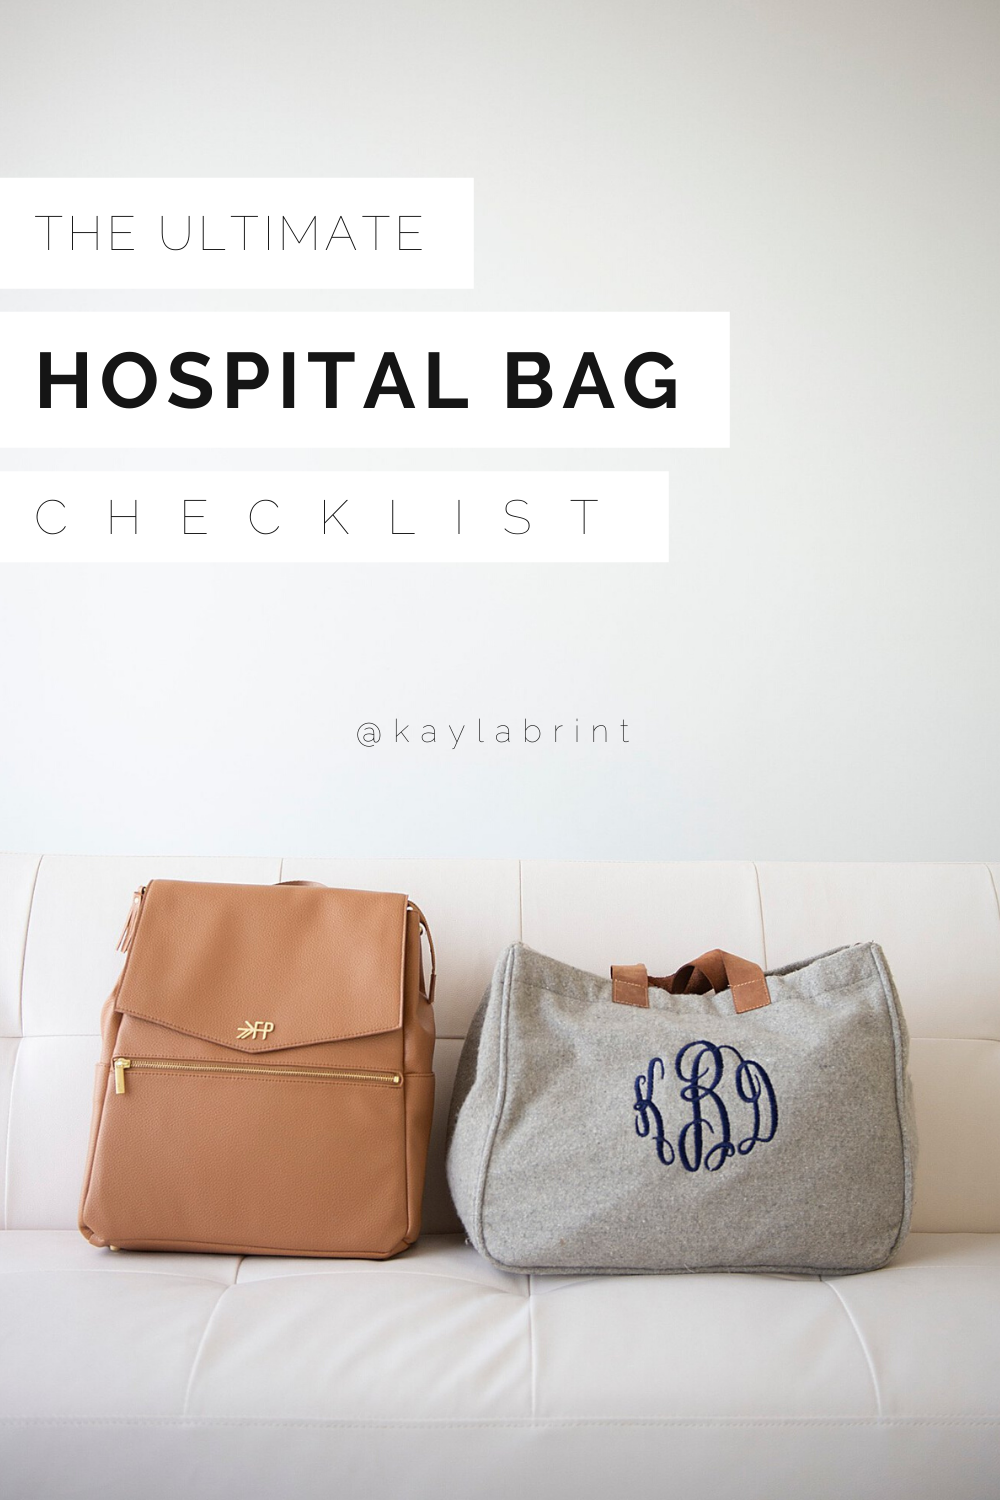 WHAT TO PACK IN YOUR HOSPITAL BAG: THE ULTIMATE HOSPITAL BAG